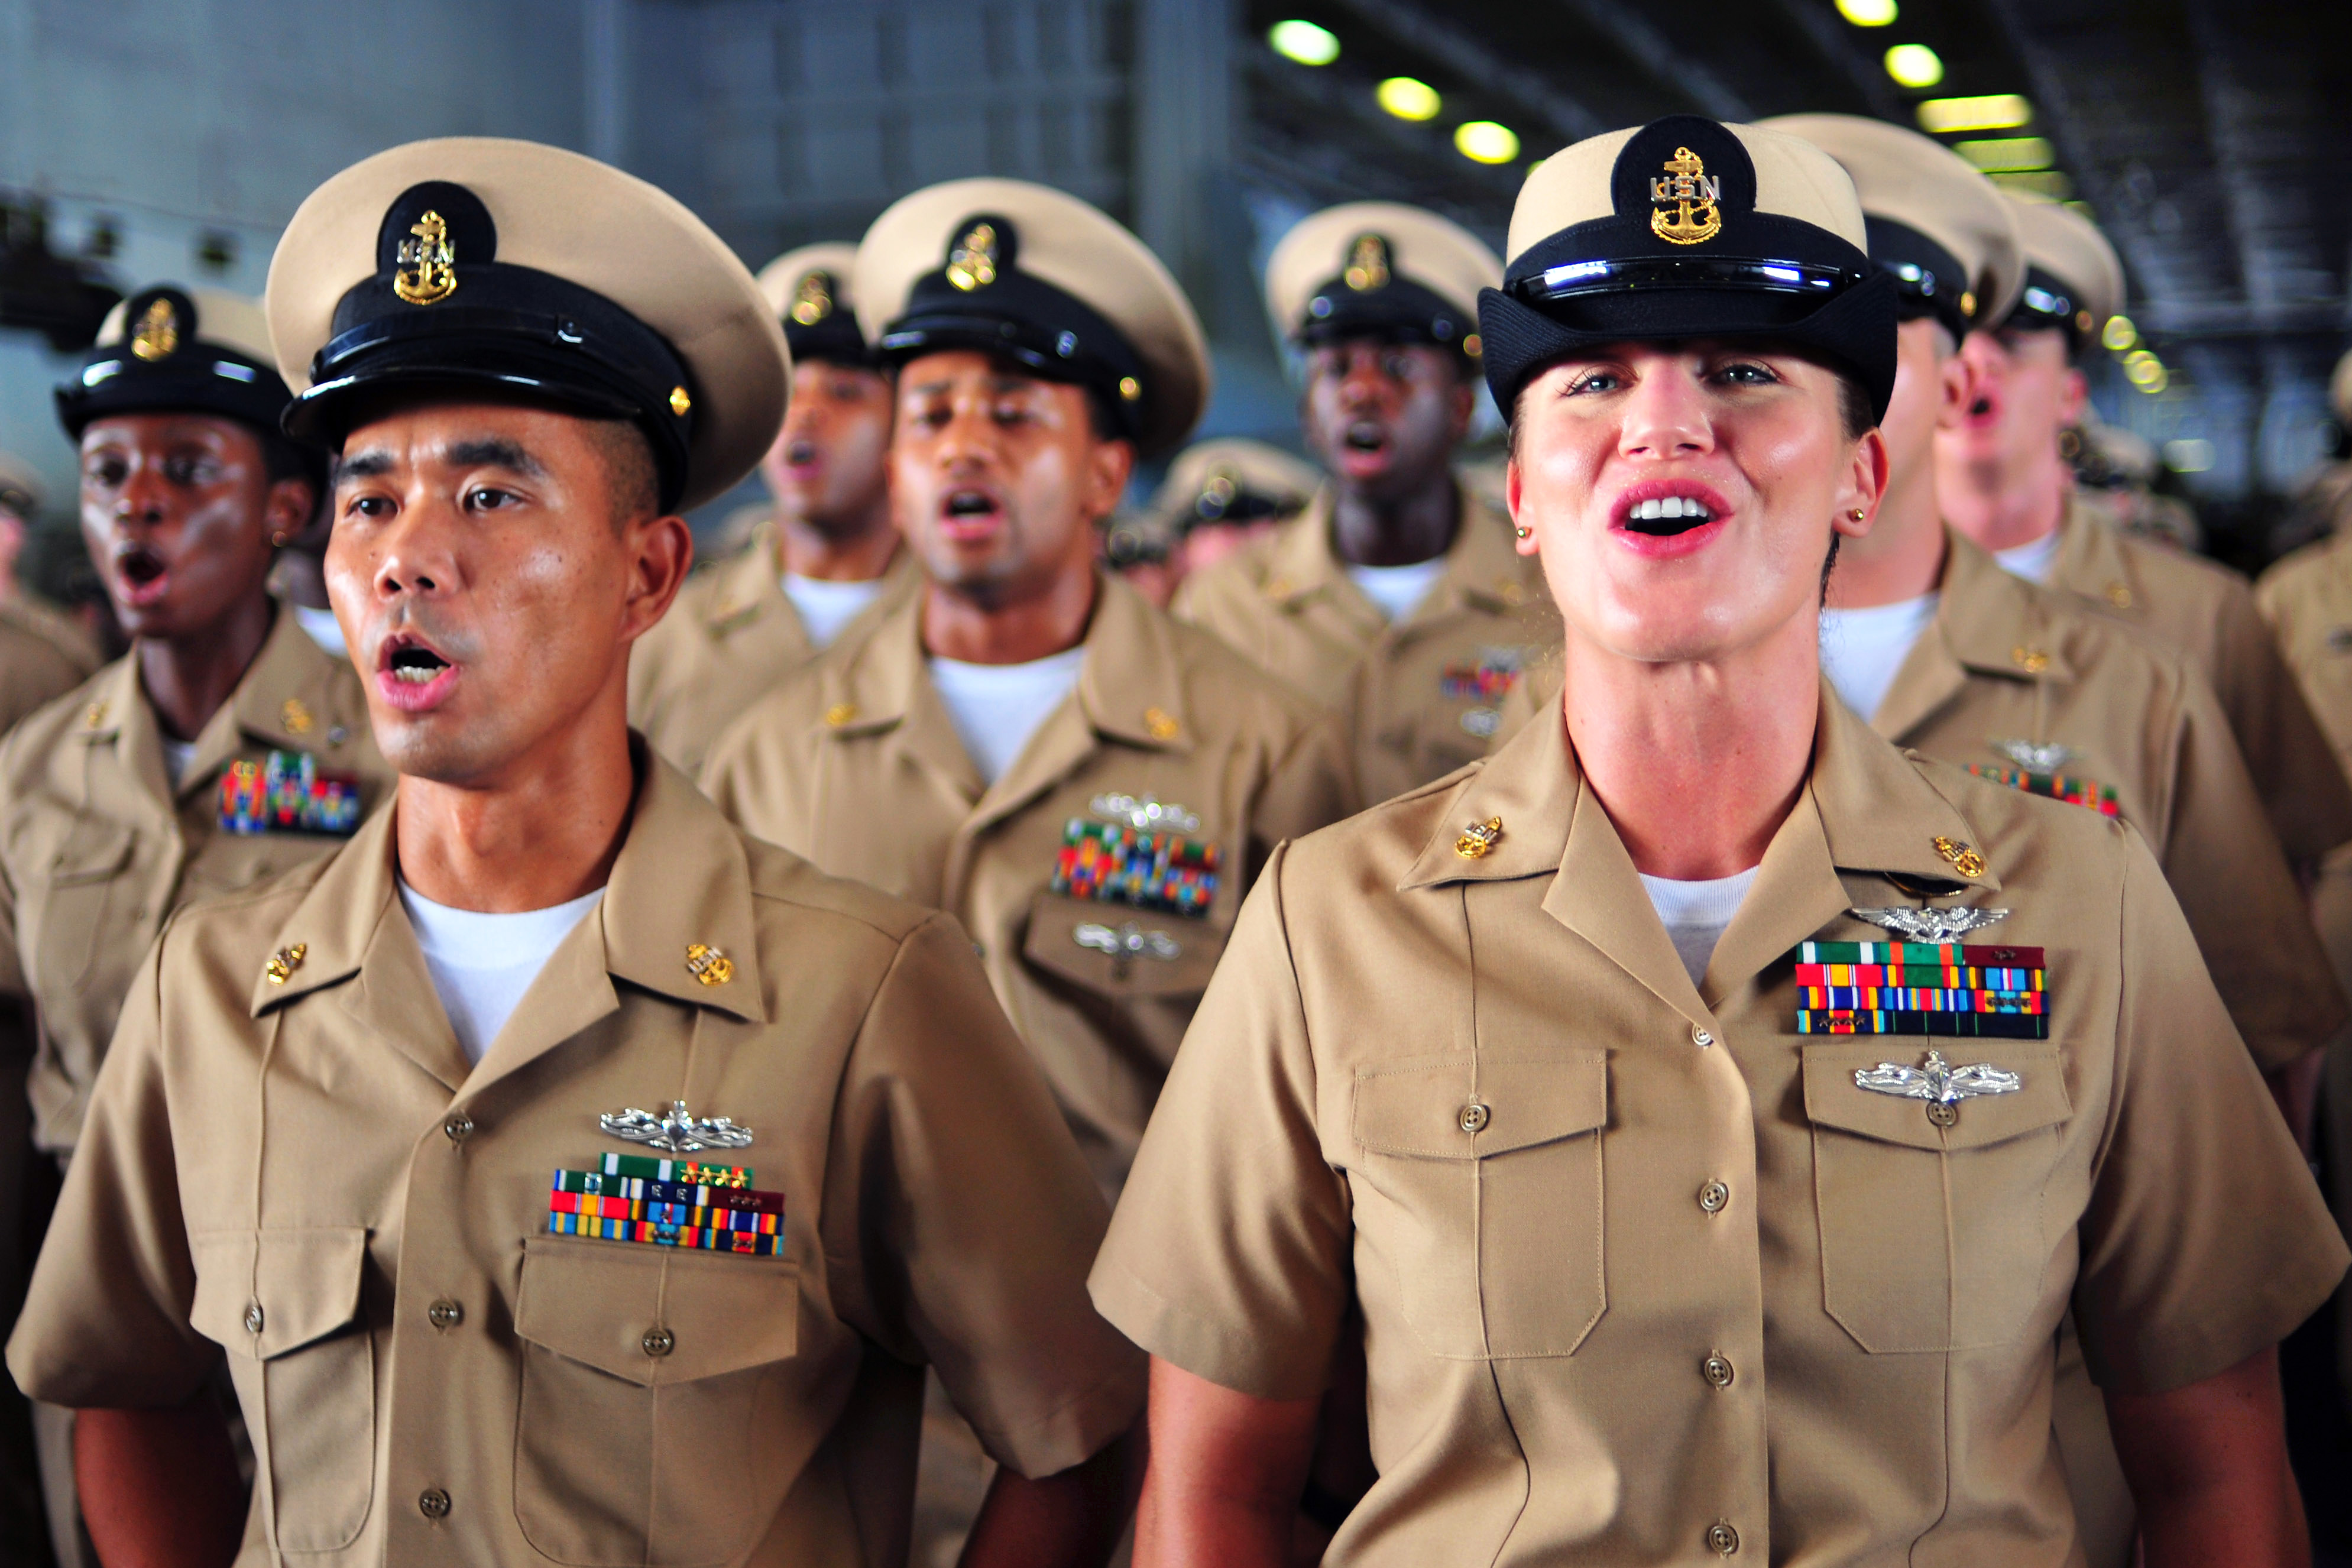 Newly frocked U.S. Navy chief petty officers sing "Anchors Aweigh